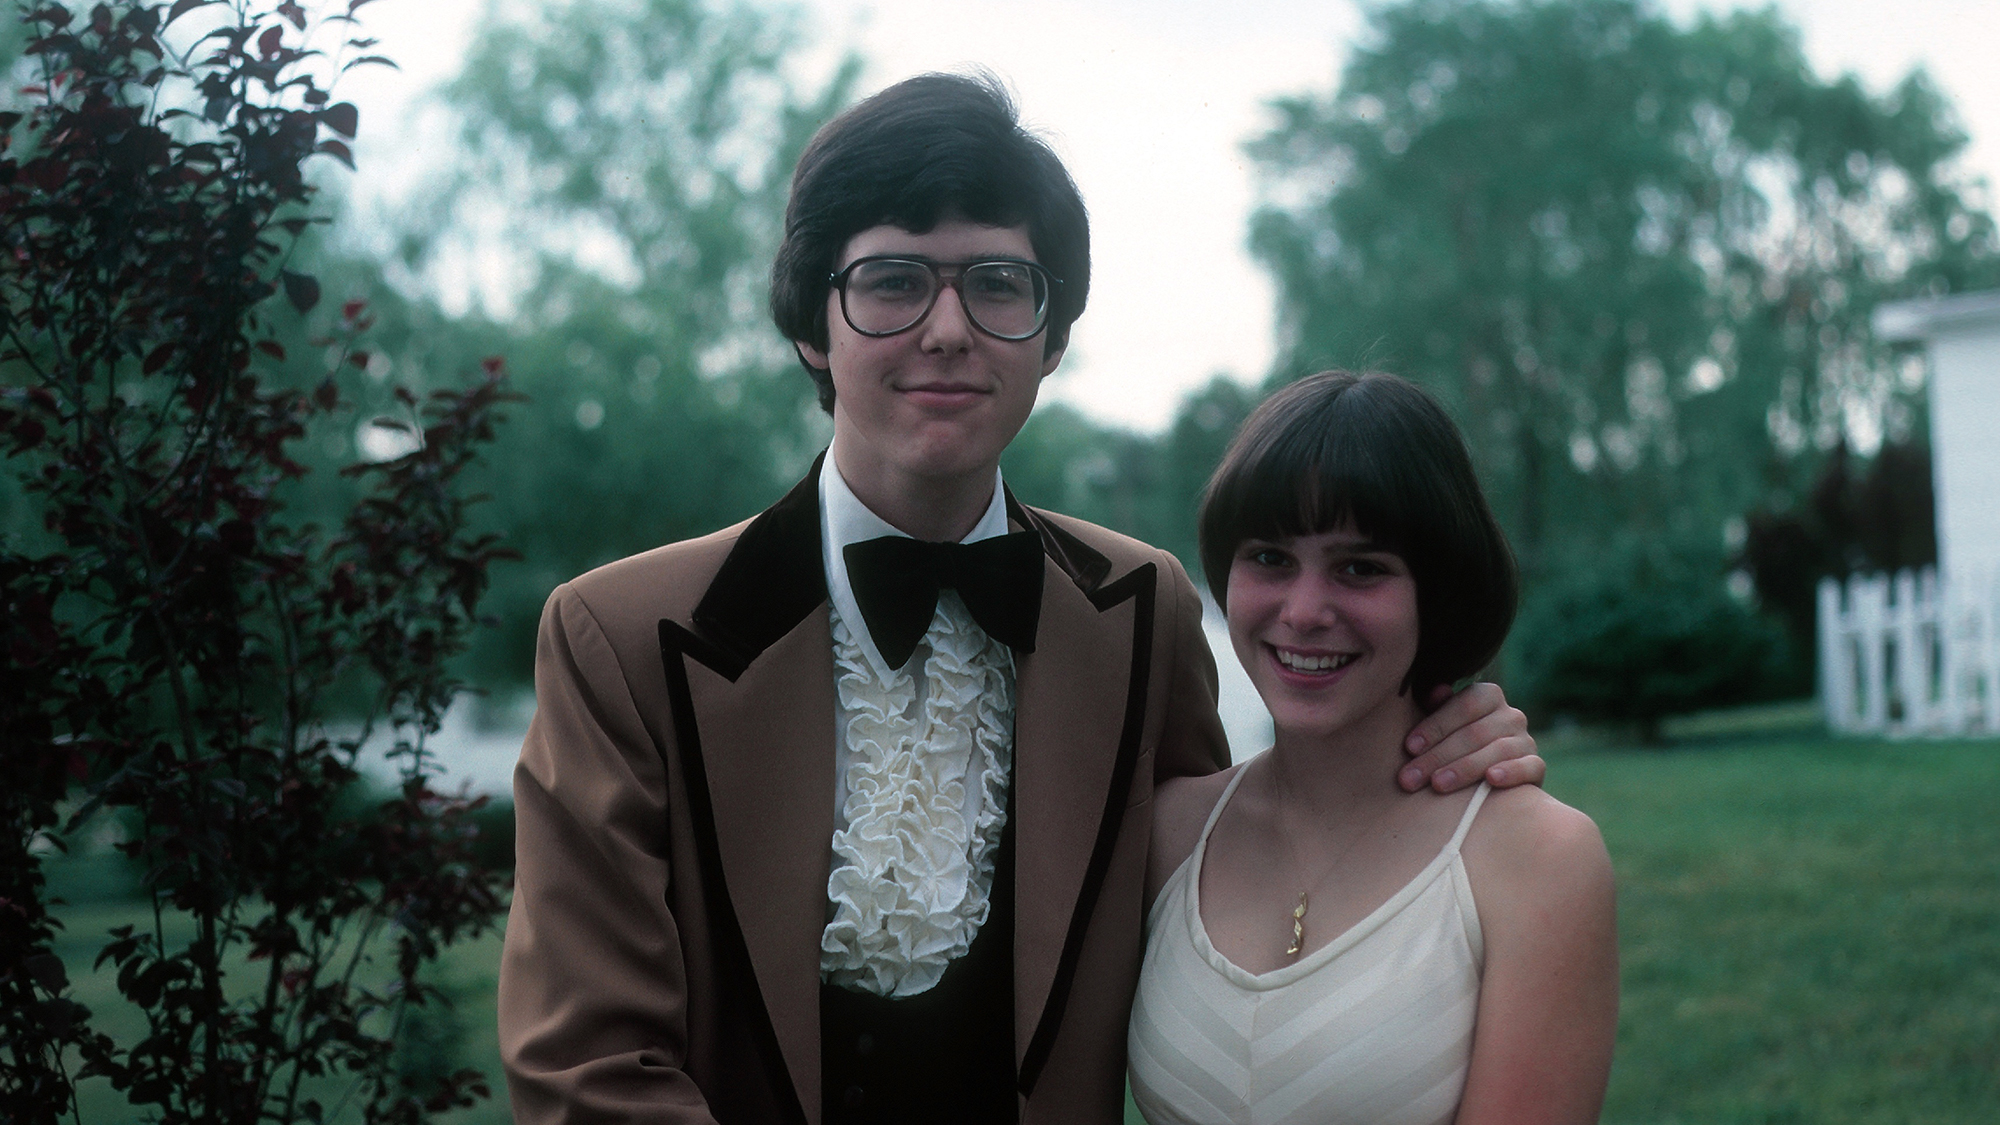 A photo of a young Ira Glass on prom night